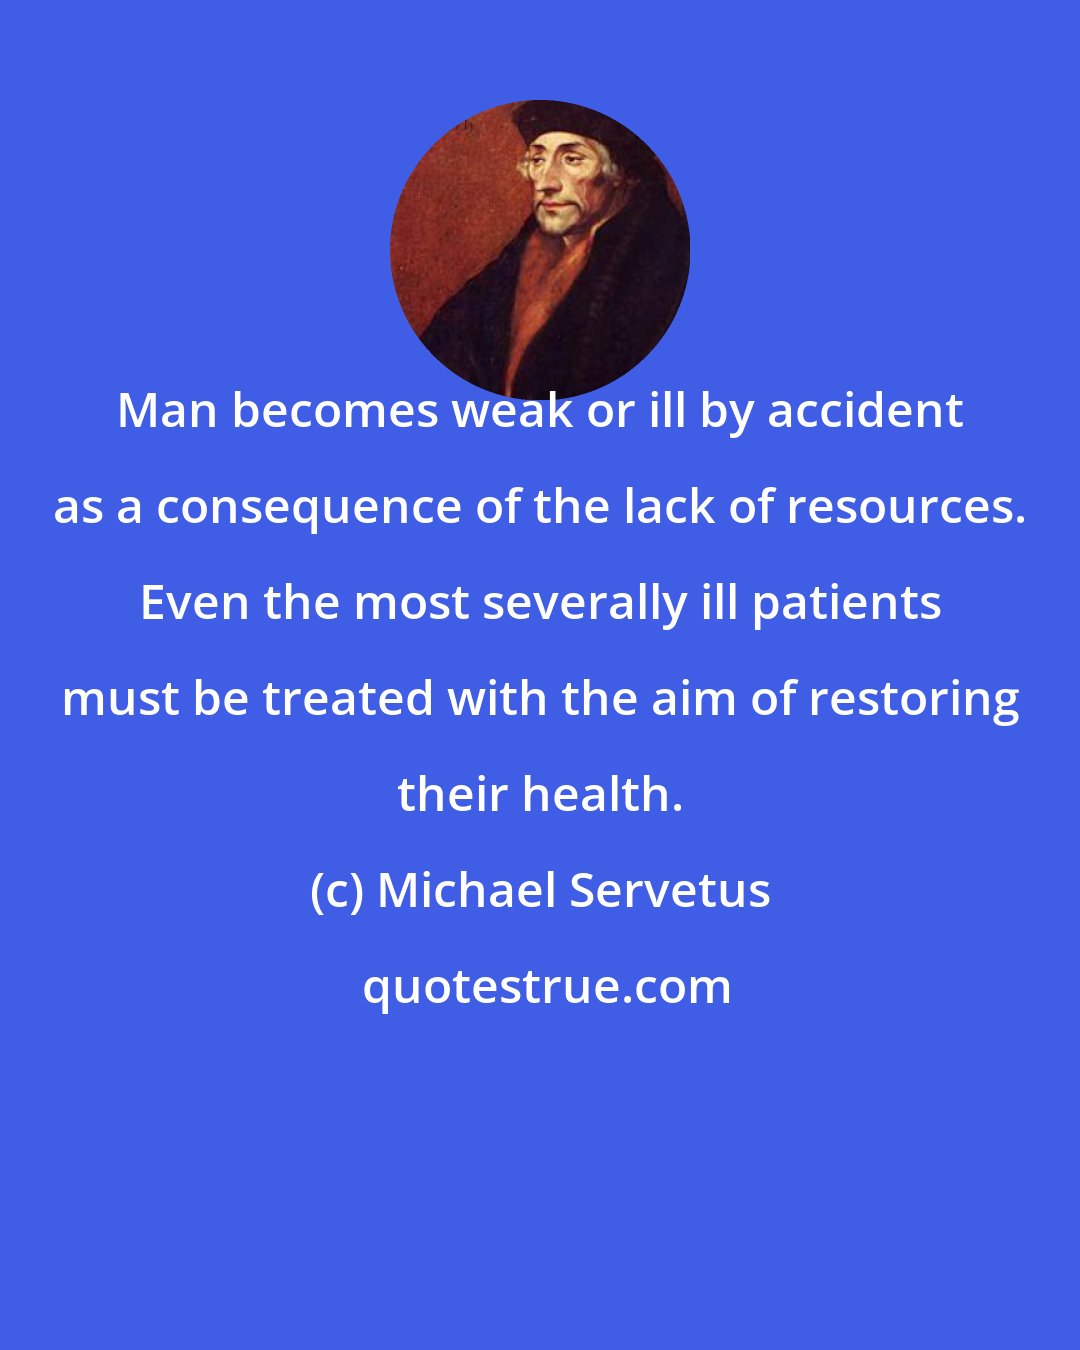 Michael Servetus: Man becomes weak or ill by accident as a consequence of the lack of resources. Even the most severally ill patients must be treated with the aim of restoring their health.